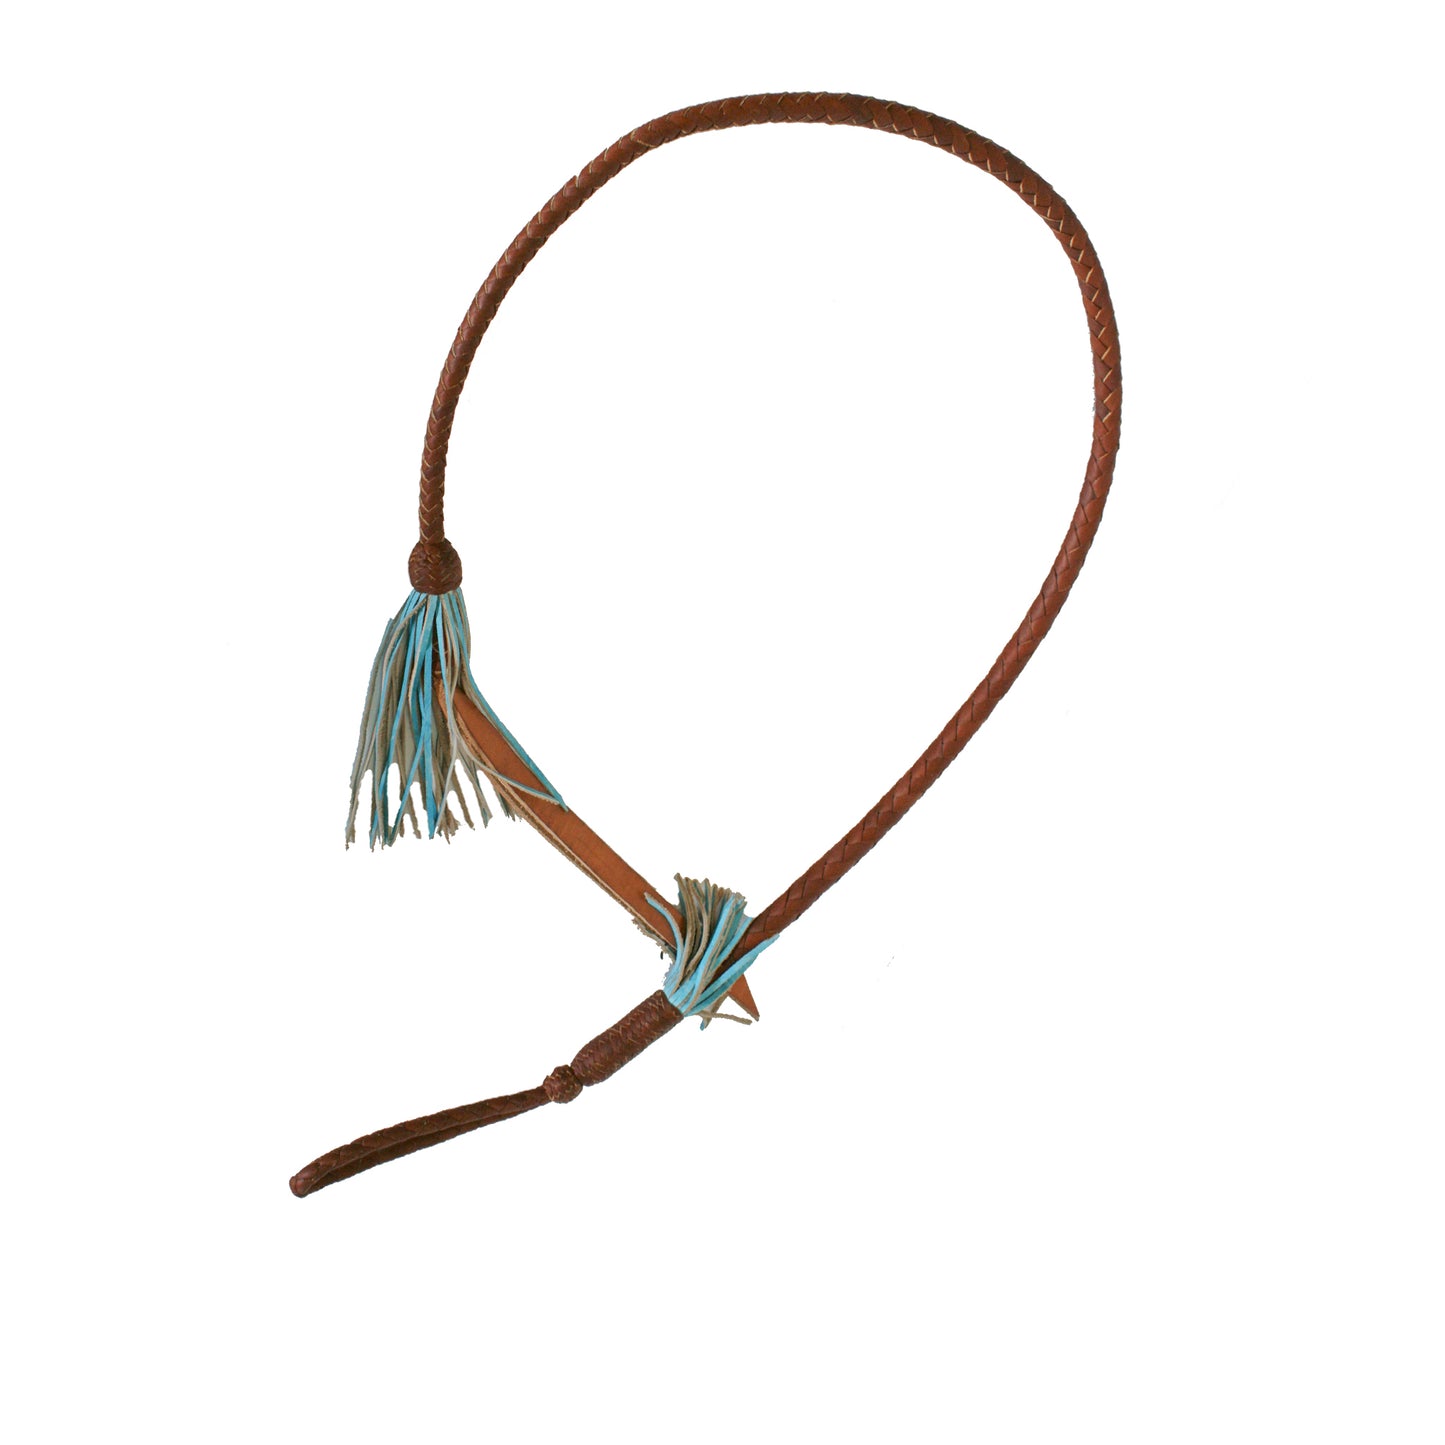 Over & under leather plaited with turquoise fringe. 